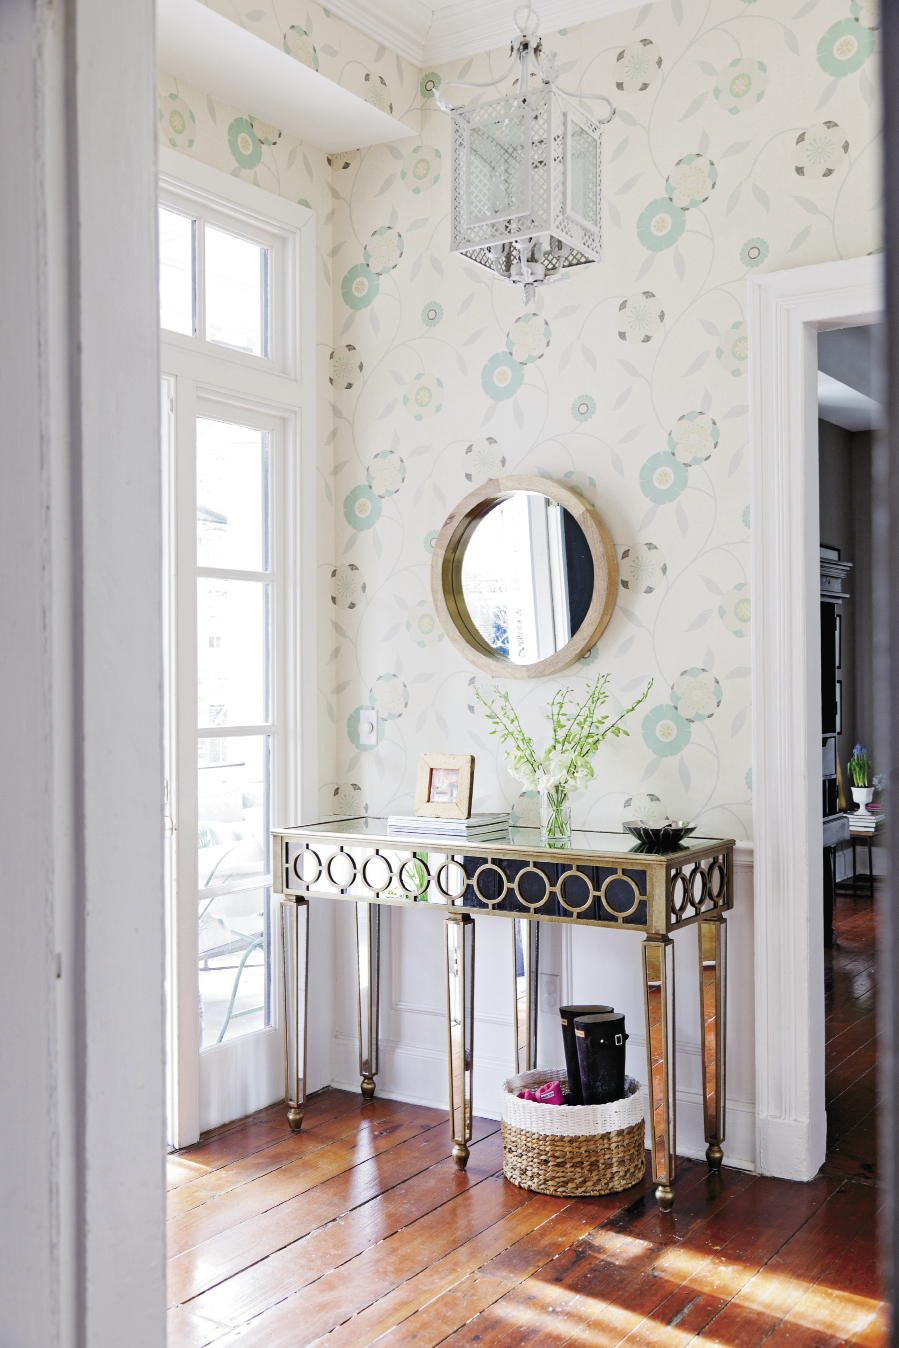 Youthful Impression Stodgy striped wallpaper was replaced with a breezy, happy pattern in Lauren and David Lails’ foyer, immediately announcing that this century-old abode has spunky new life.